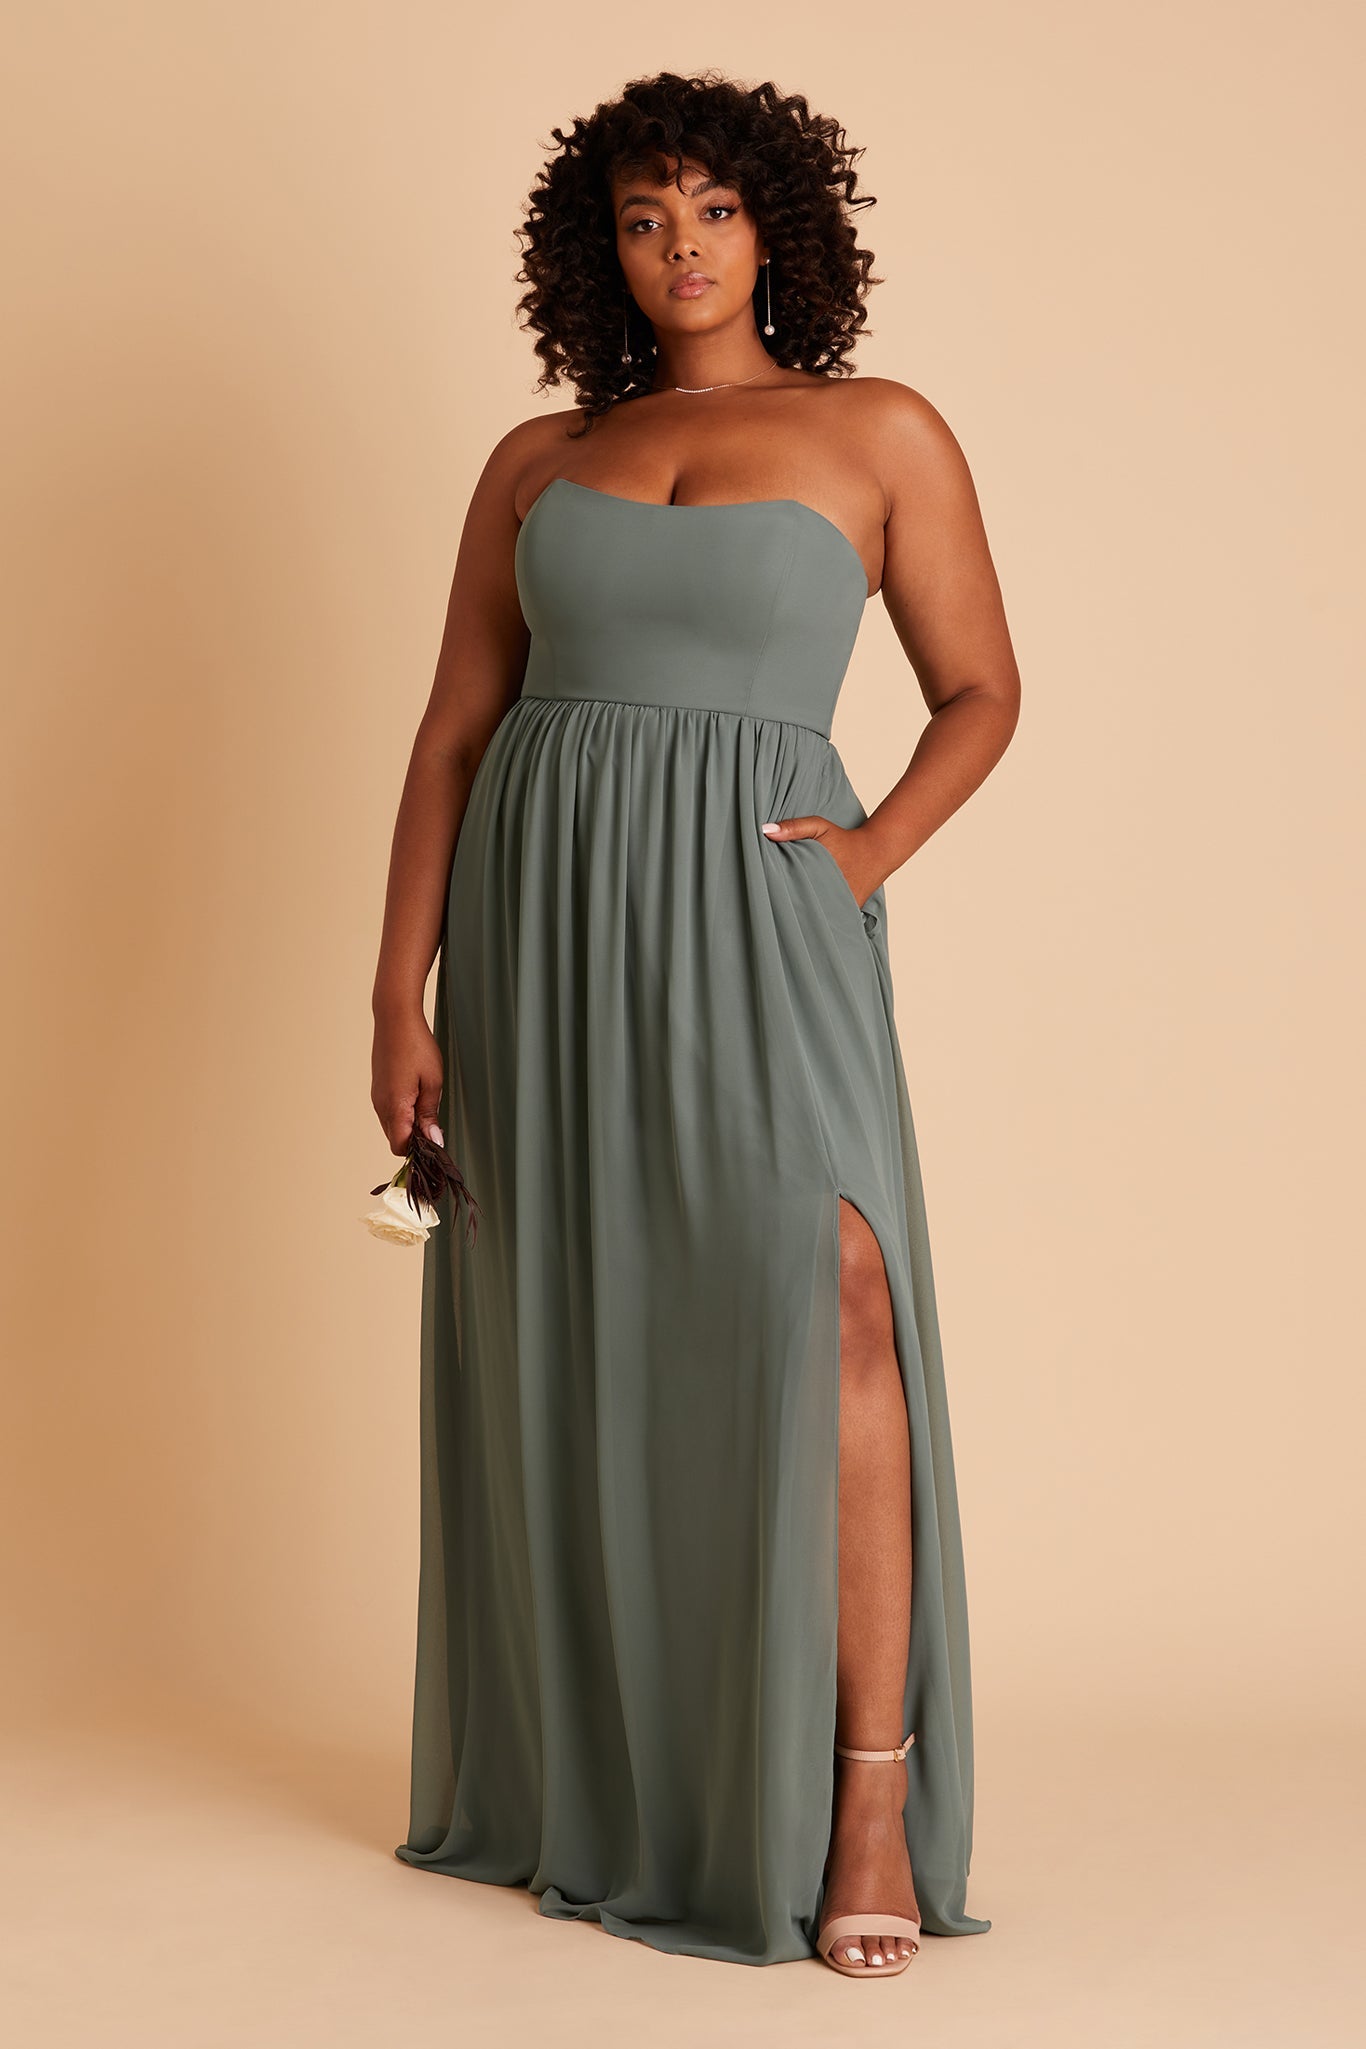 August plus size bridesmaid dress with slit in sea glass chiffon by Birdy Grey, front view